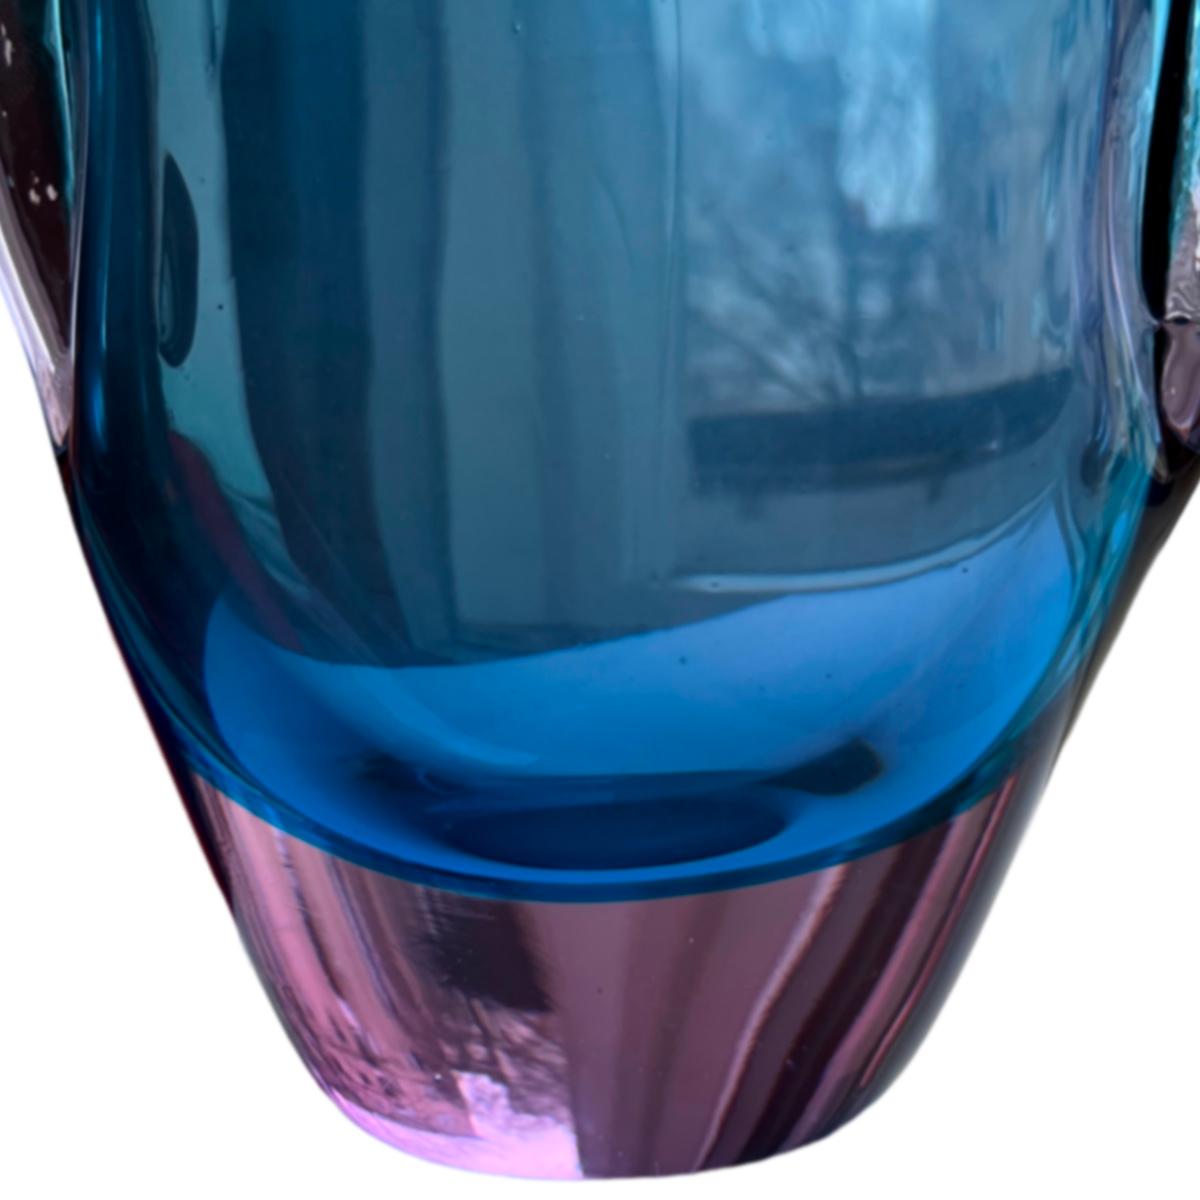 Hand-Crafted Flavio Poli Murano Glass Penguin Sommerso Vase  1960´s For Sale